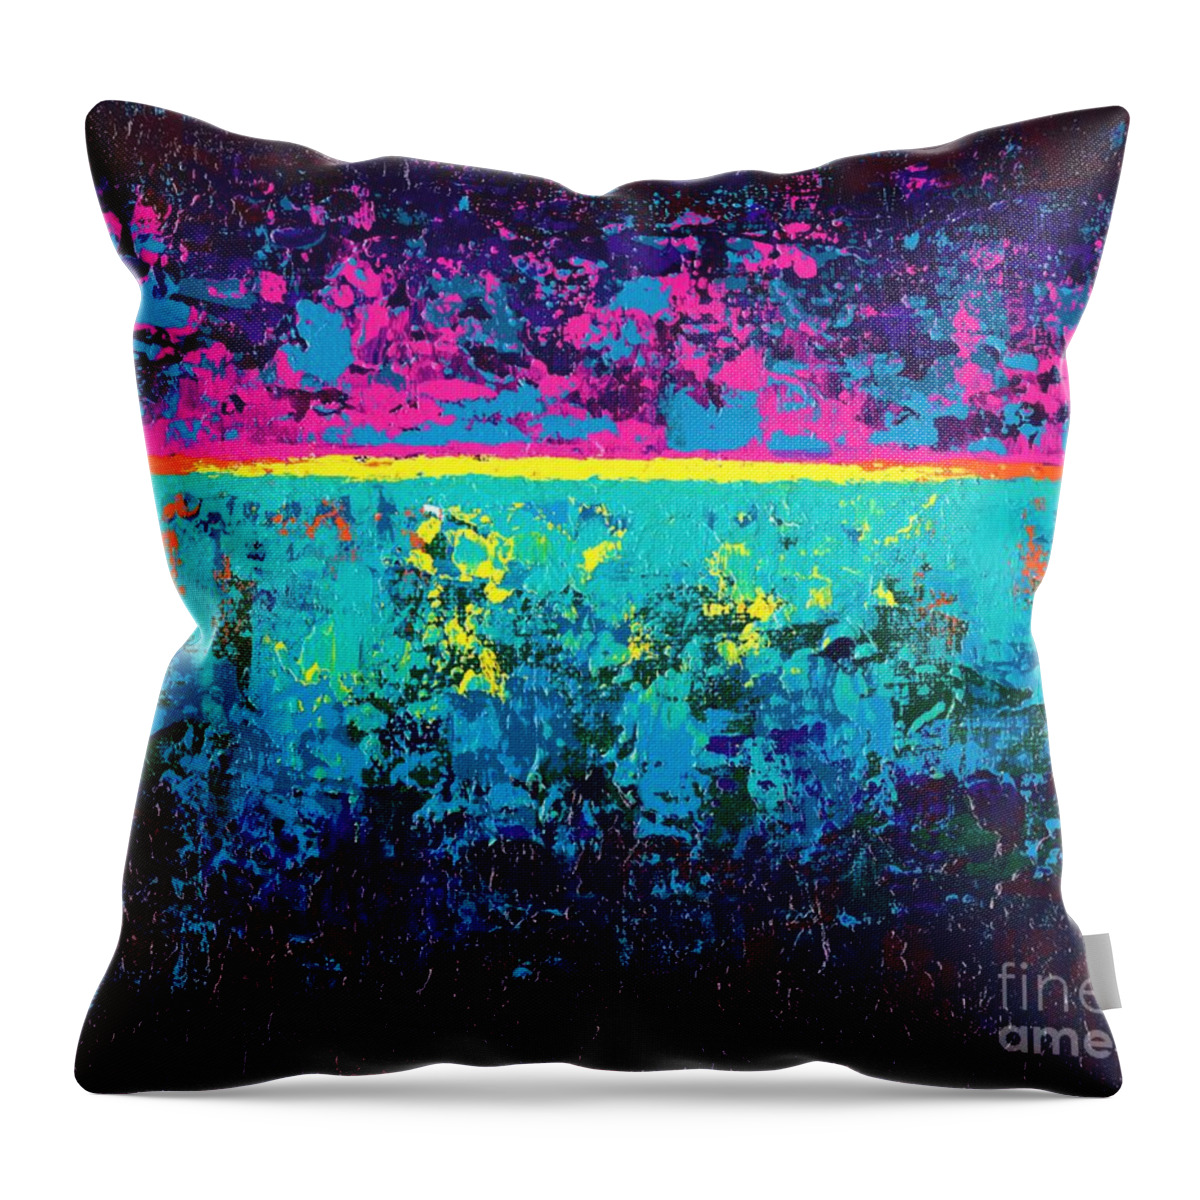 #madewithmichaels #art #abstract #contemporary #allisonconstantino Throw Pillow featuring the painting 1st Light by Allison Constantino